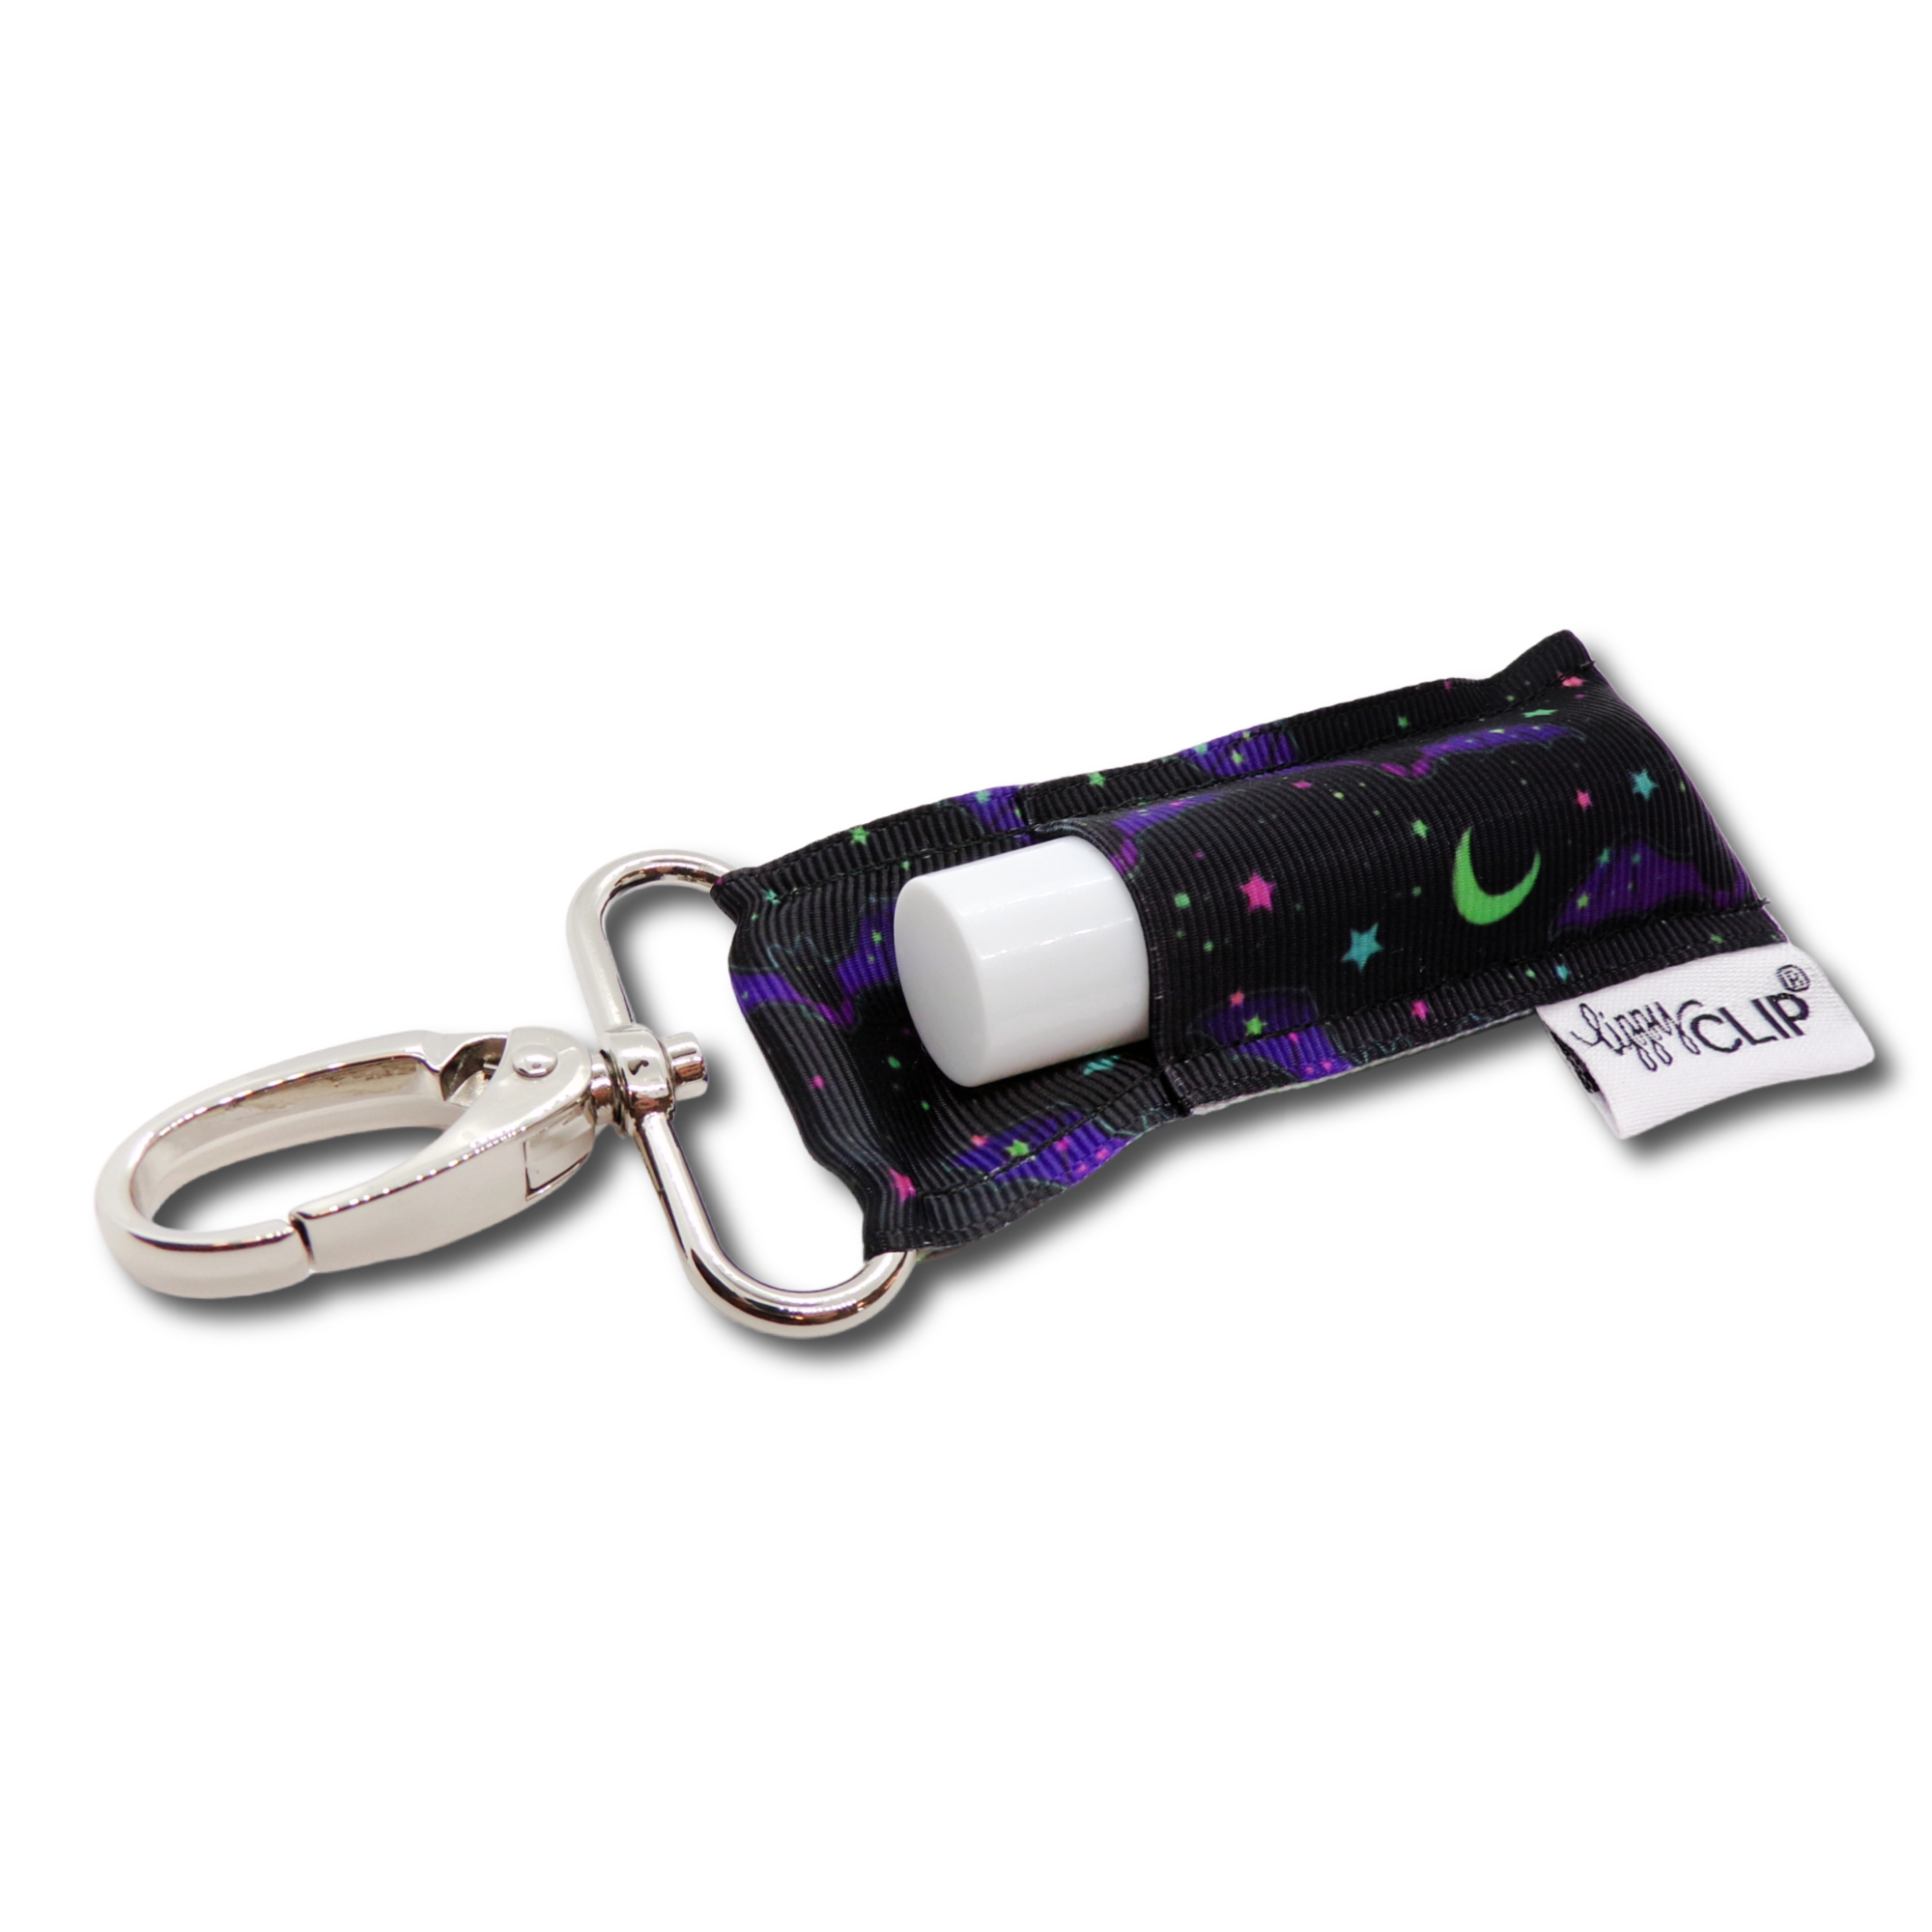 Shop Spooky Halloween Night LippyClip® - Lip Balm Holder for Chapstick-Keychains at Ruby Joy Boutique, a Women's Clothing Store in Pickerington, Ohio